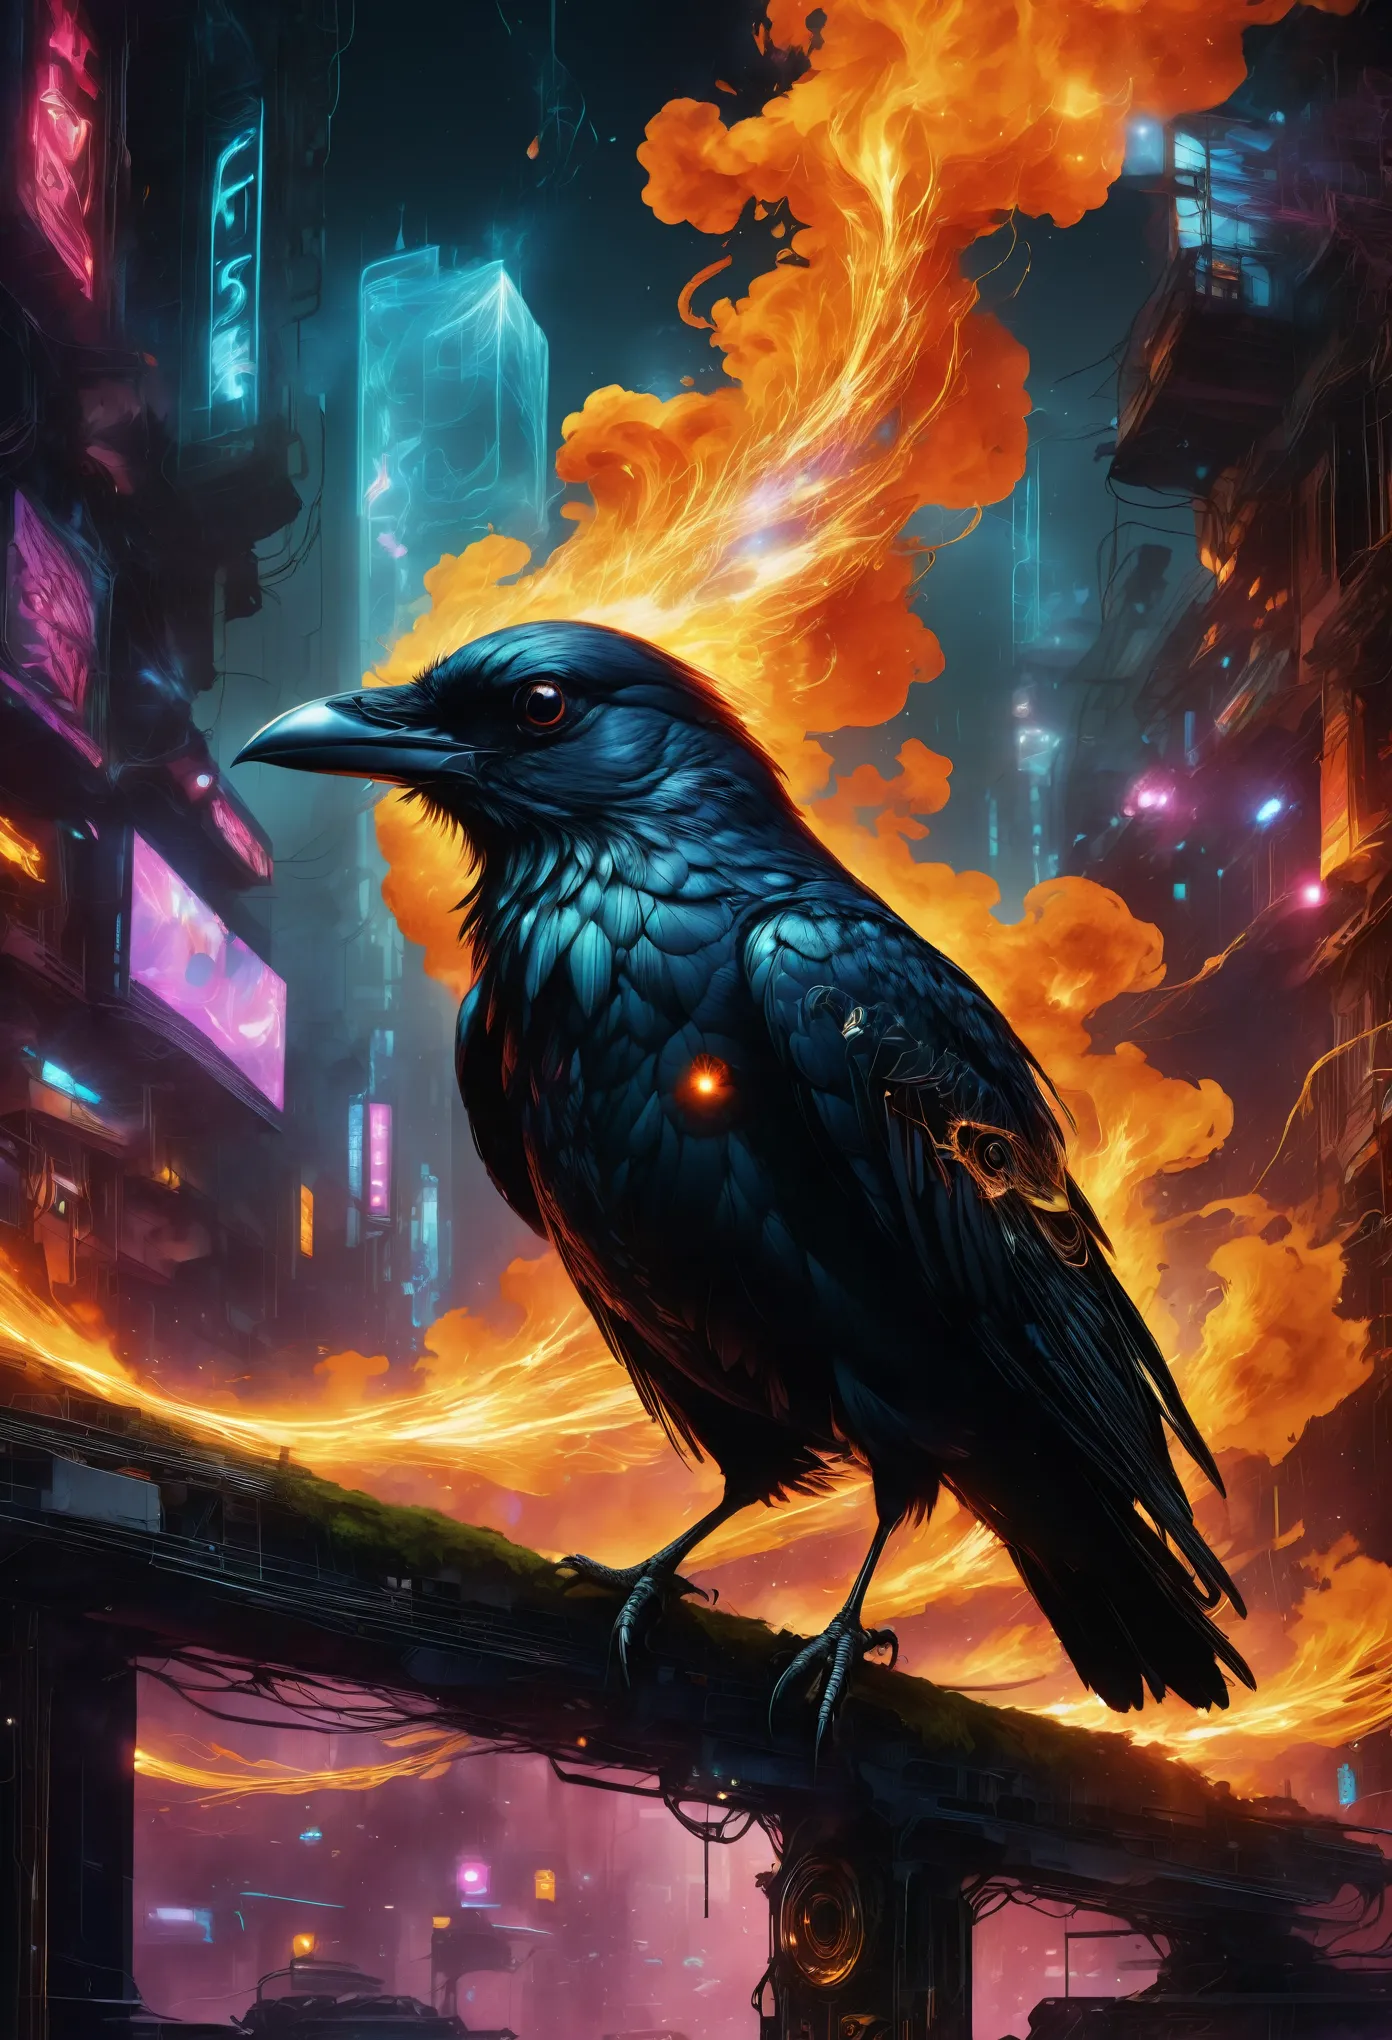 A masterful artistic digital rendering of a sinister glowing cybernetic crow made from sparks and fire by Simon Prades, russ mills, Shaun Ryken, celestial, UHD, 8k resolution, fantasy editorial art, color grading, intricate, hyperdetailed, beautiful composition, a modern surrealistic masterpiece by Dan Mumford